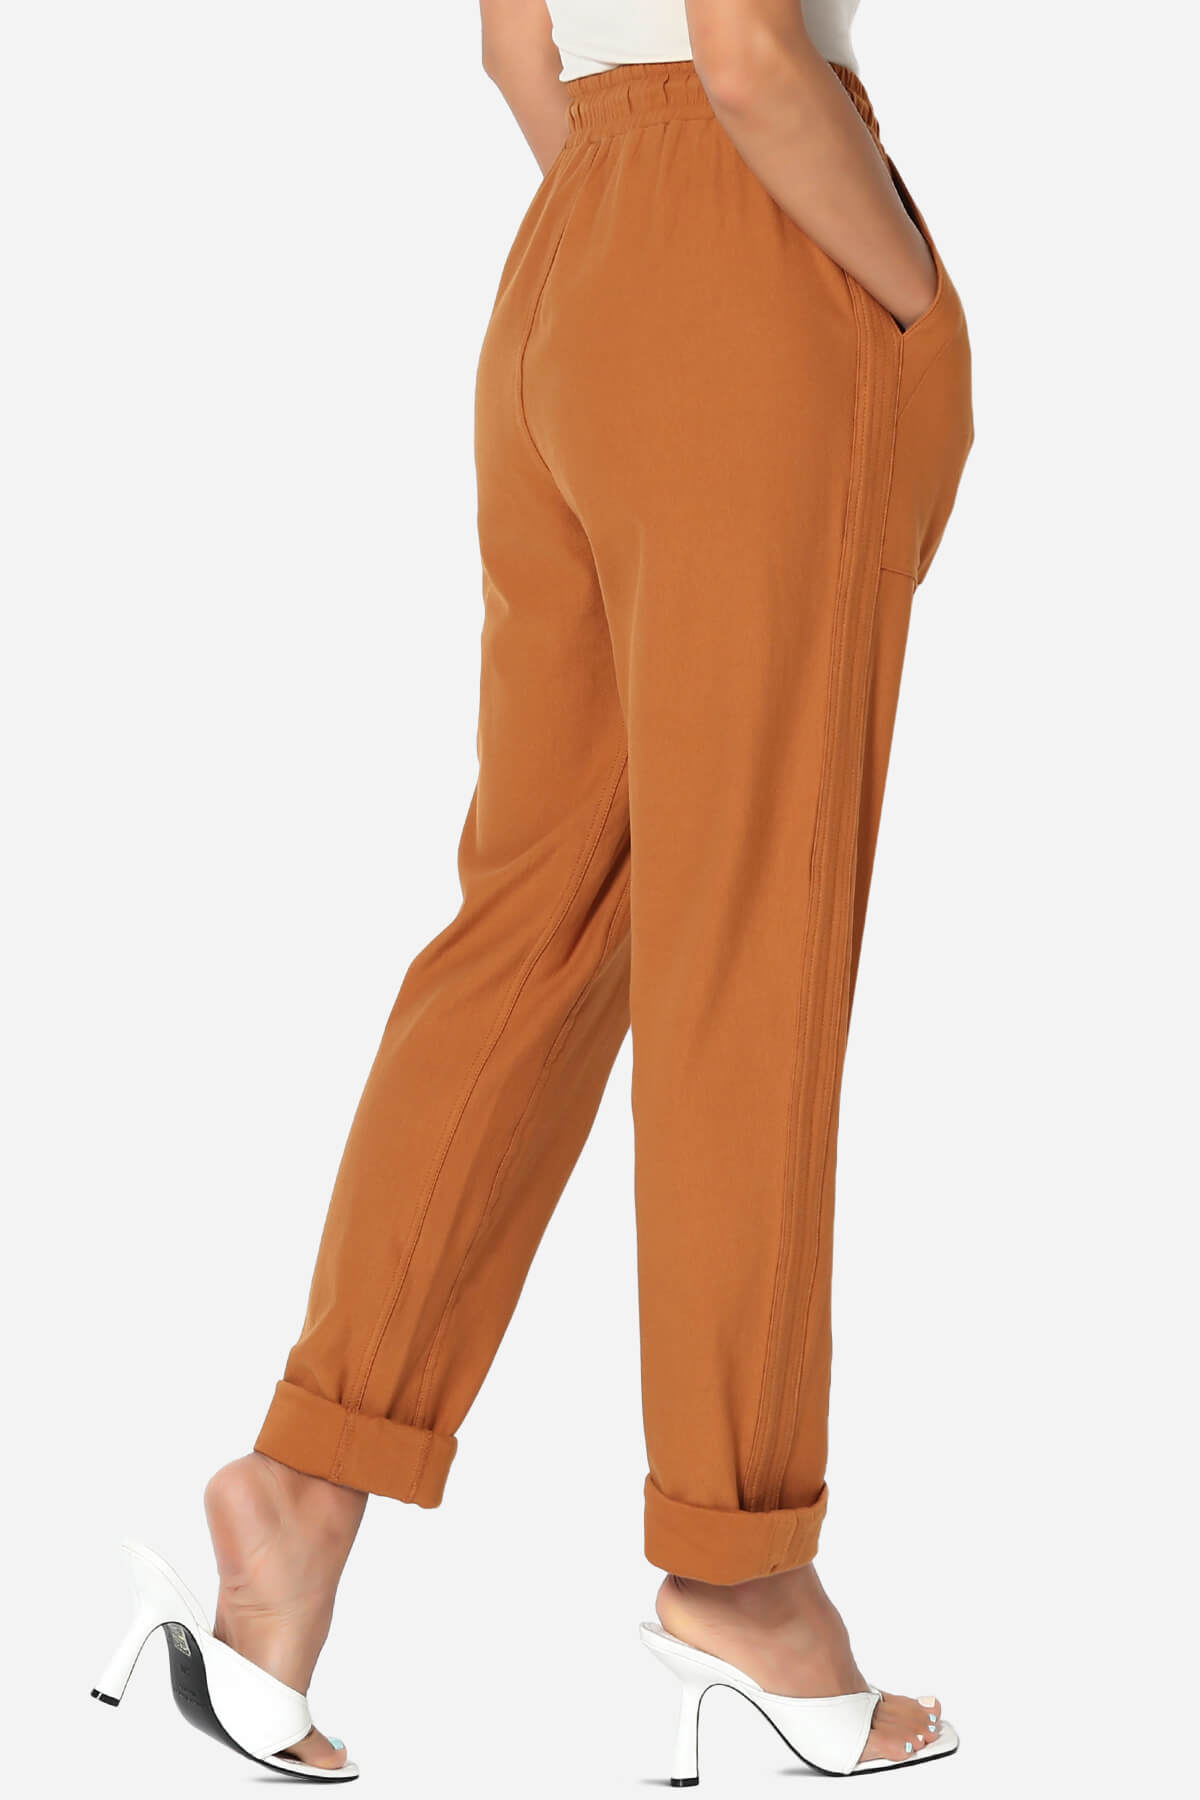 Vex Cuffed Relaxed Stretch Twill Pants